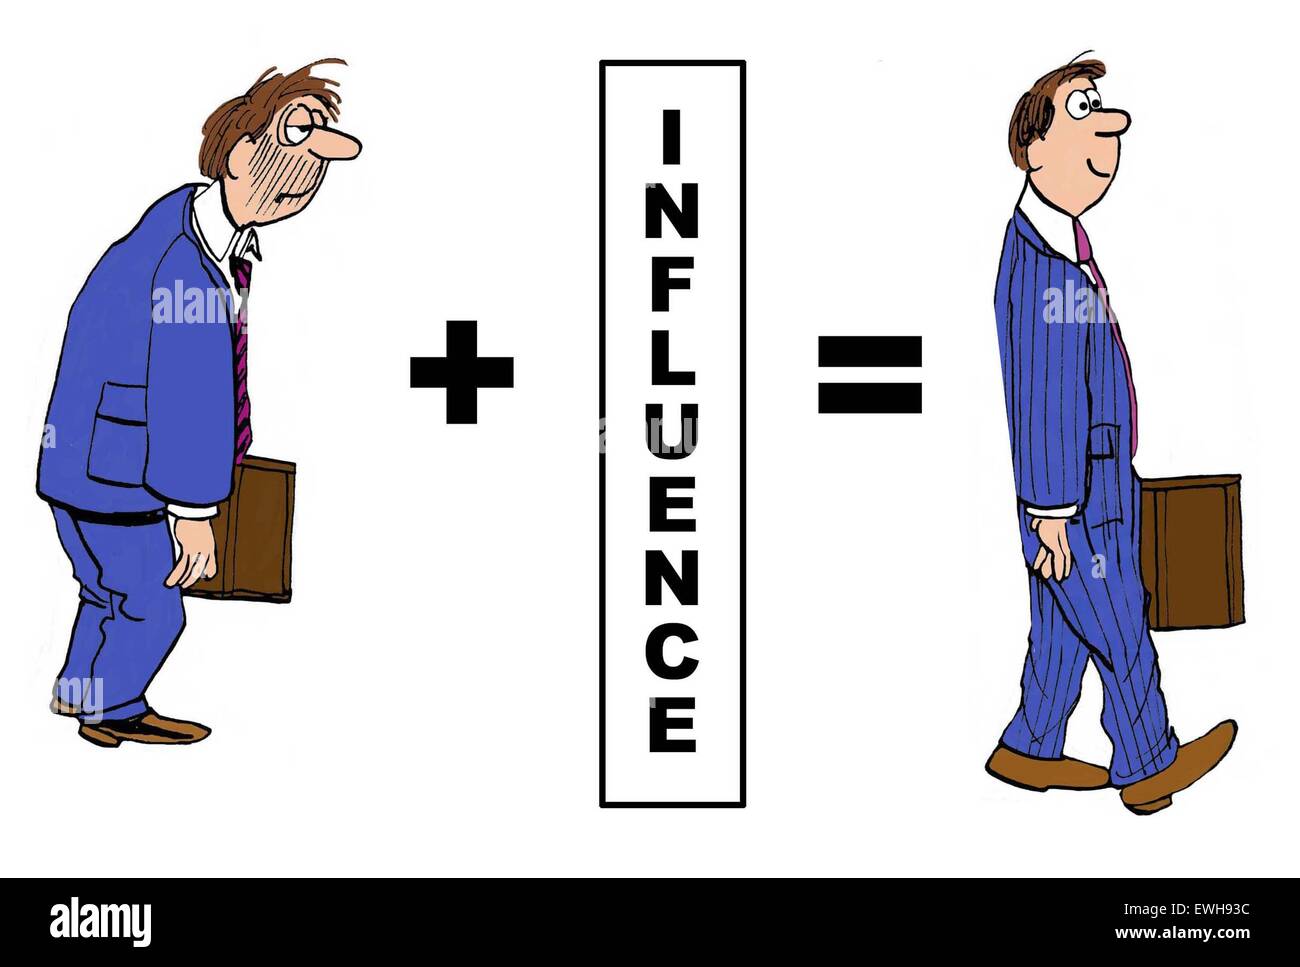 Business cartoon showing the positive impact of 'influence' on the businessman. Stock Photo